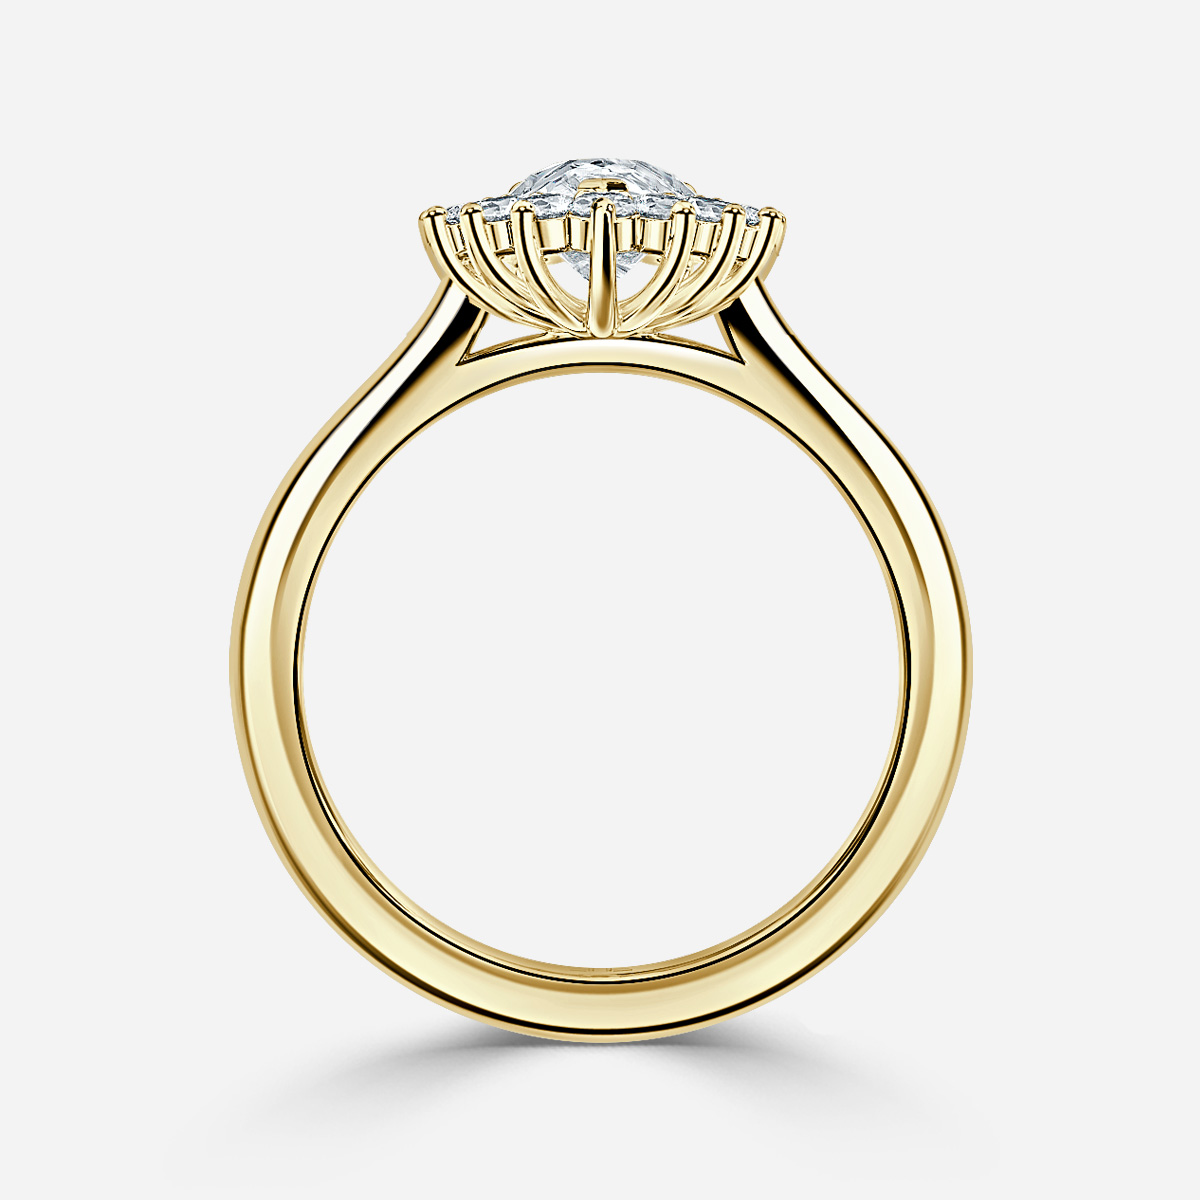 Windermere Yellow Gold Cluster Engagement Ring